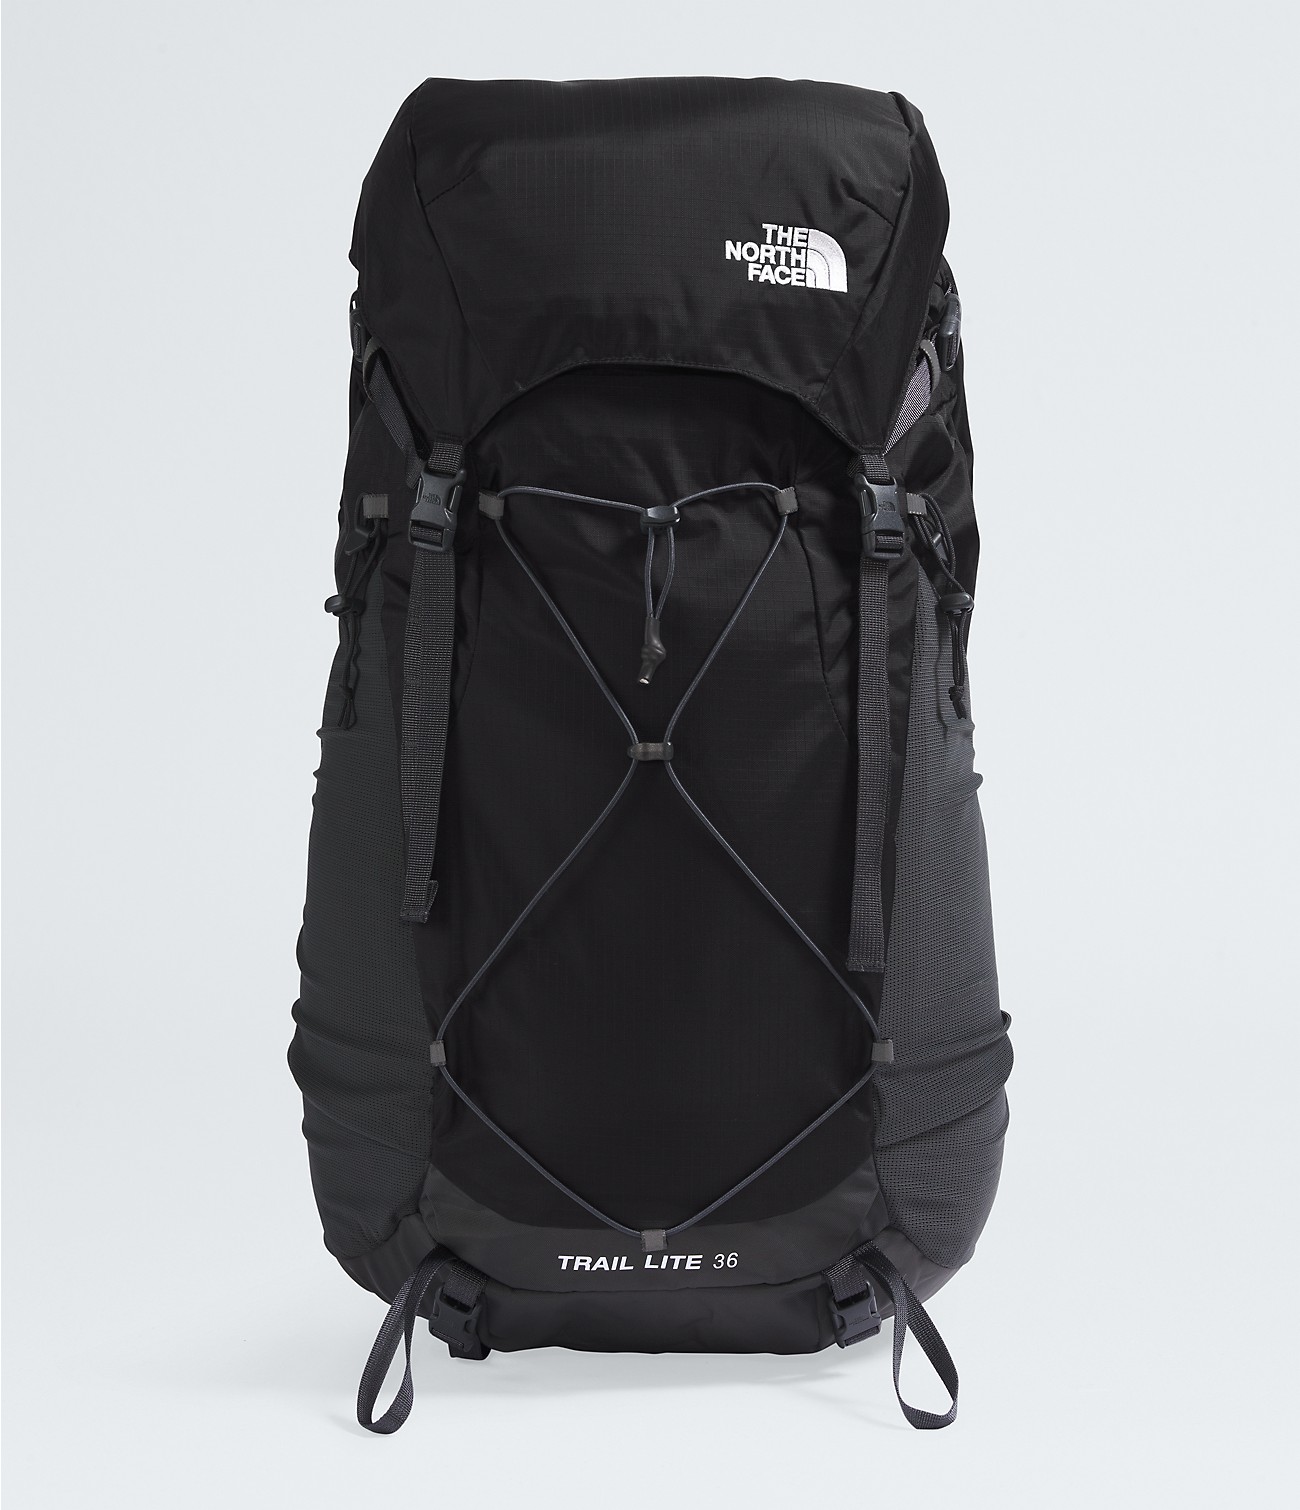 Trail Lite 36 Backpack | The North Face